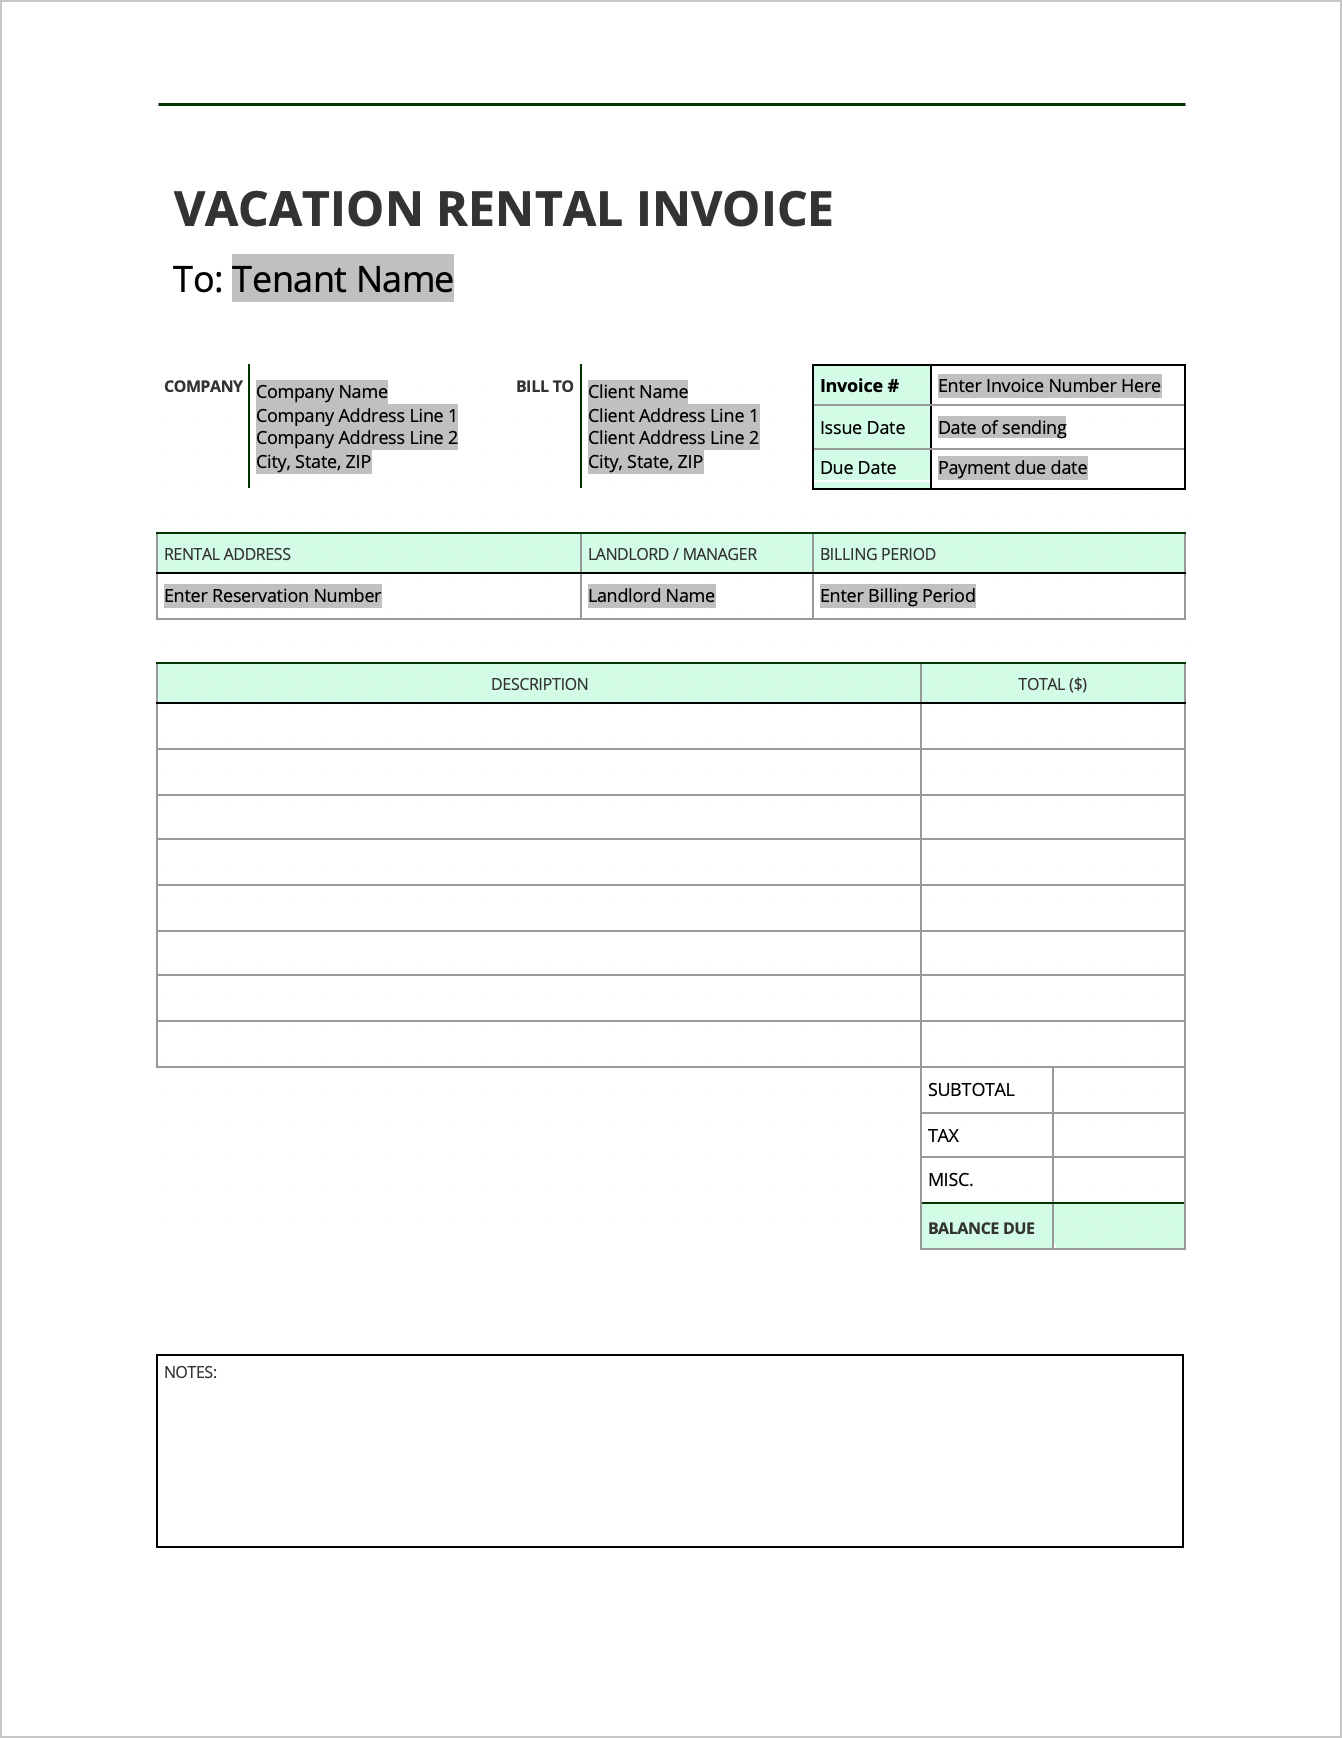 Free Vacation Rental Invoice Template PDF WORD EXCEL